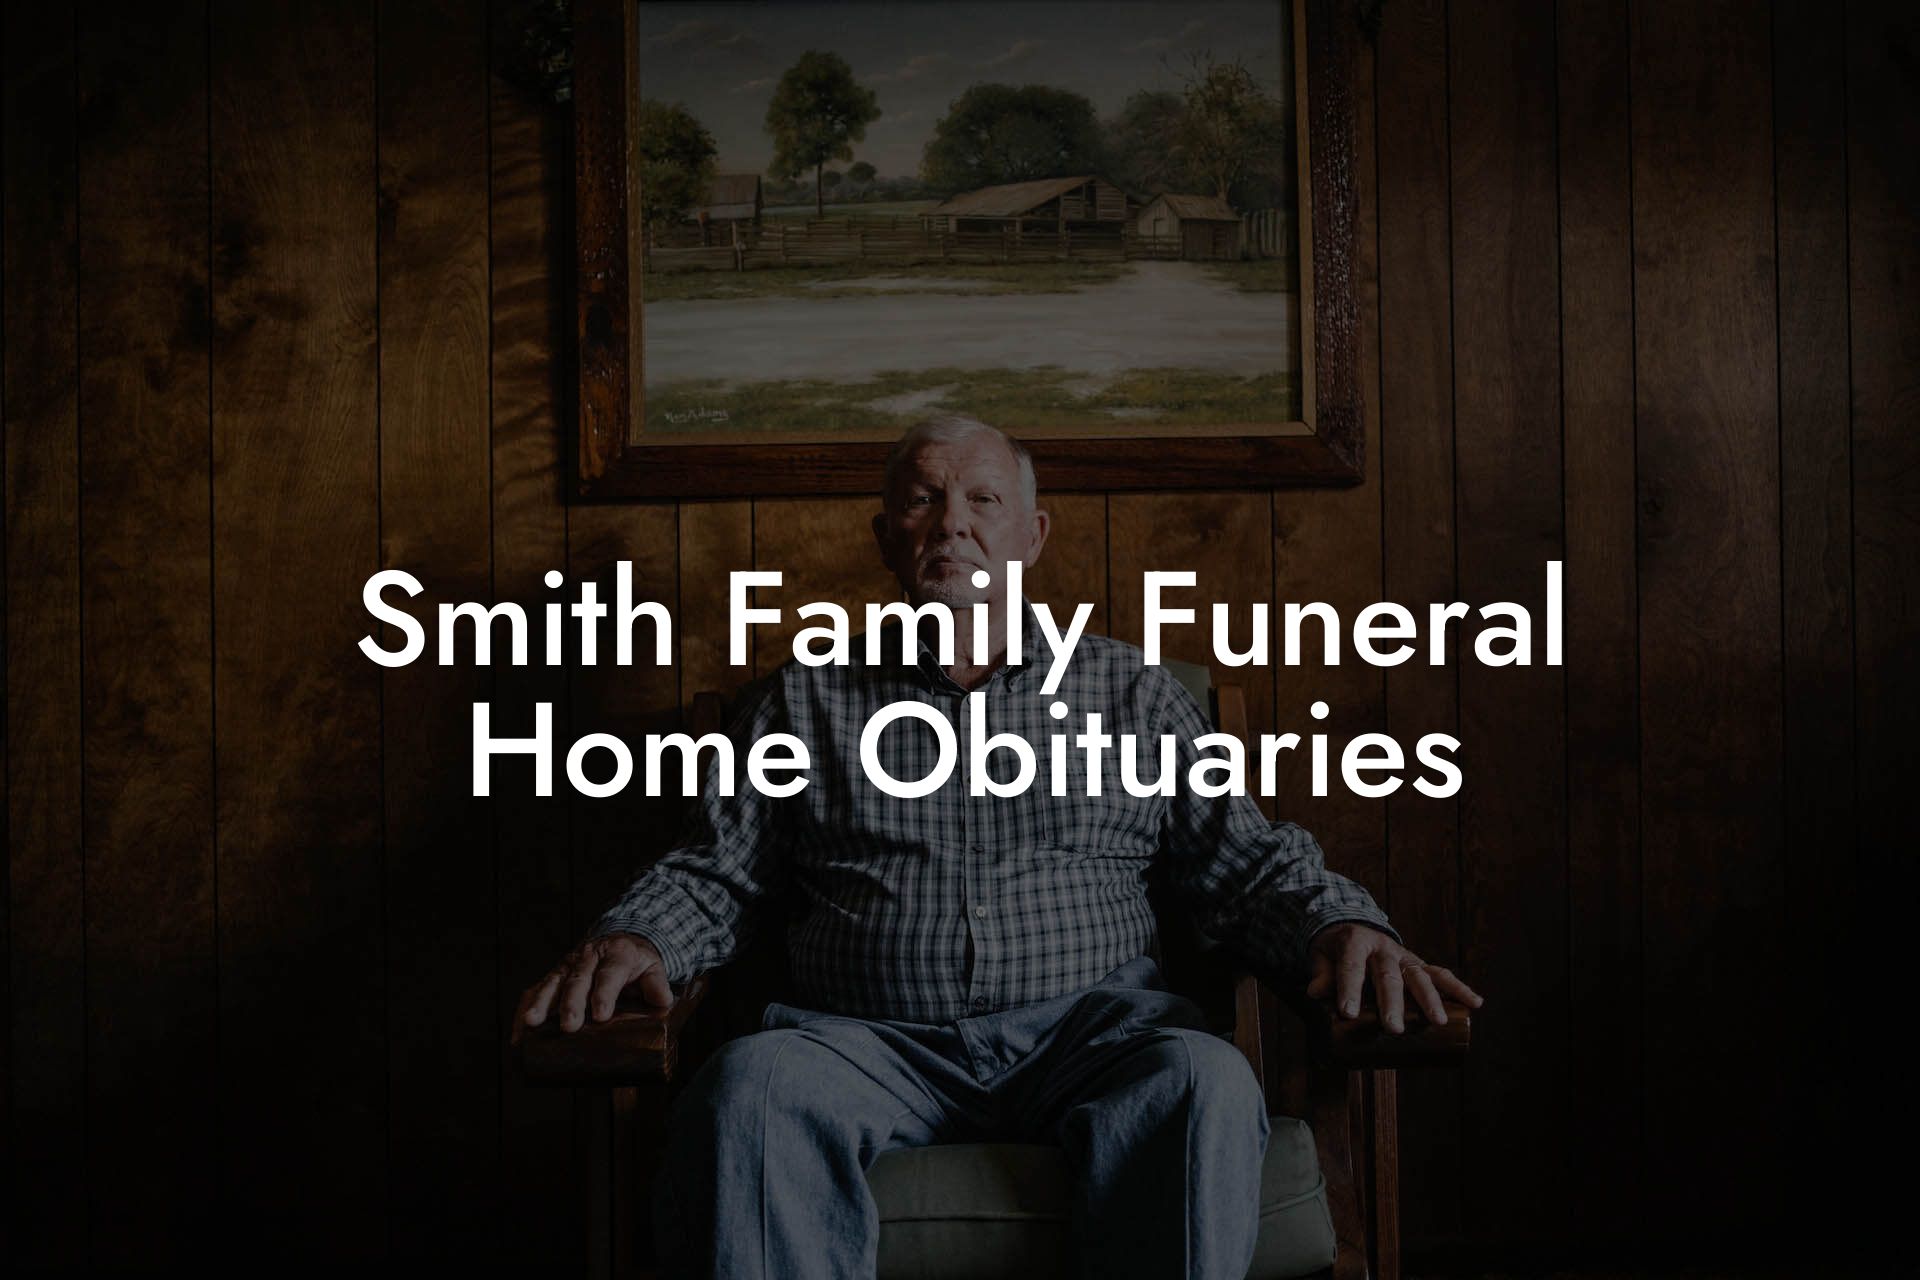 Smith Family Funeral Home Obituaries